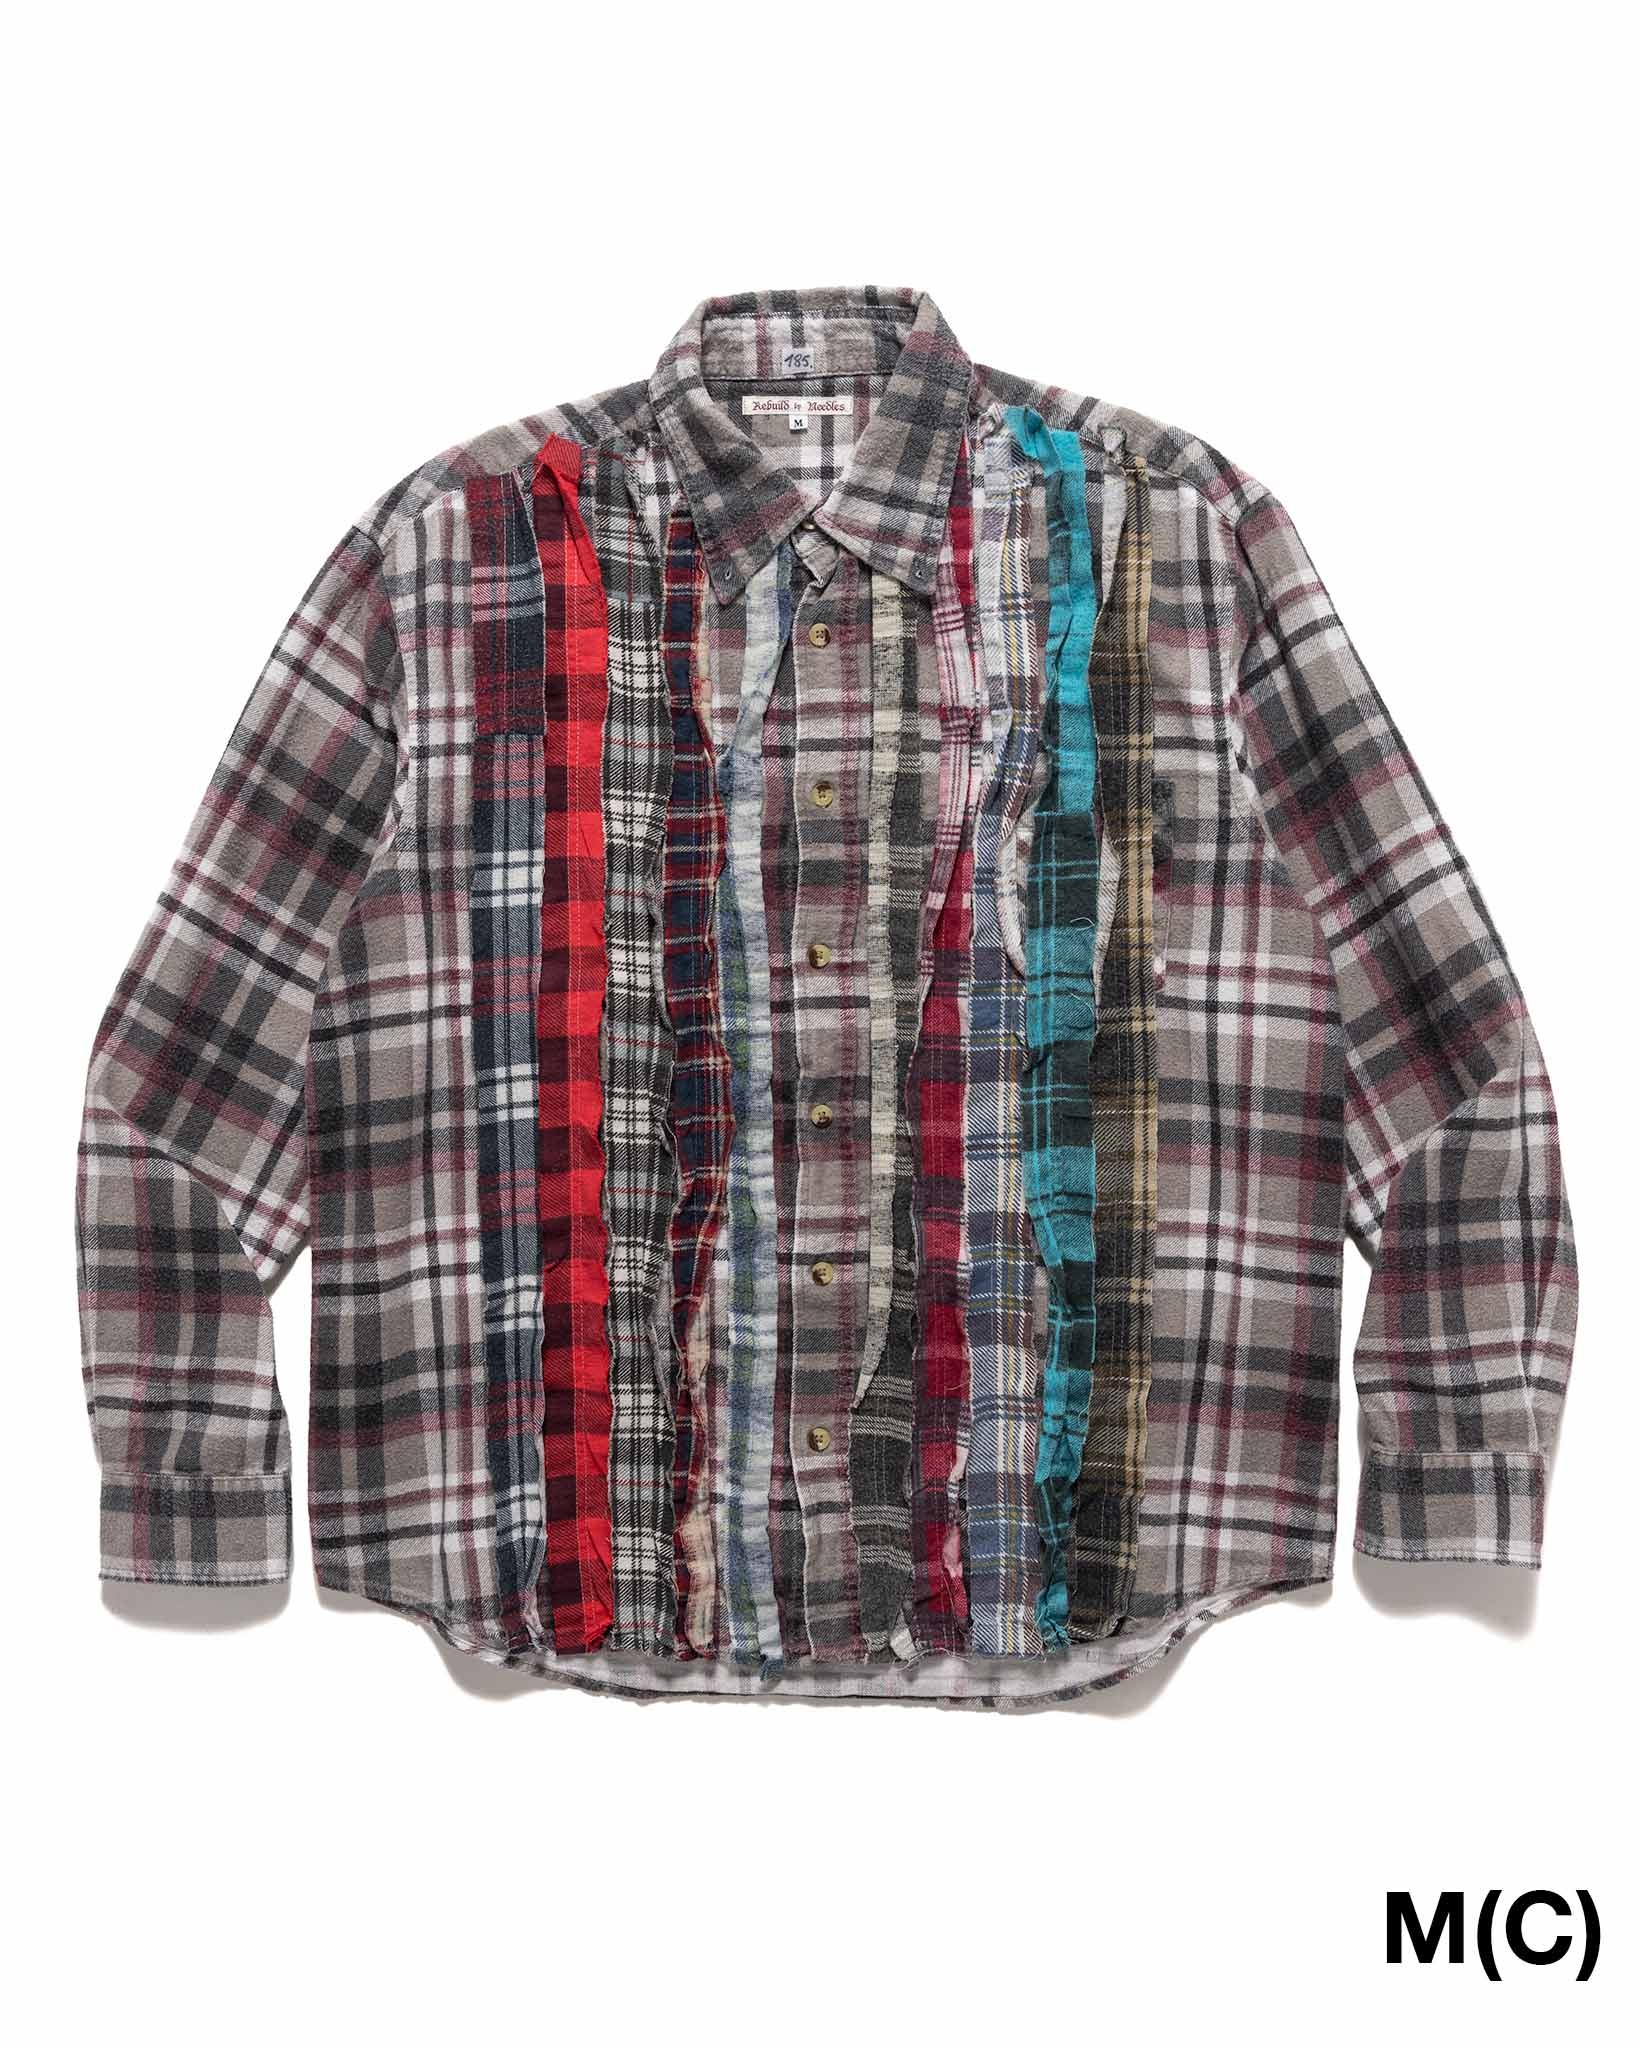 Rebuild by Needles Flannel Shirt -> Ribbon Shirt Assorted - 11